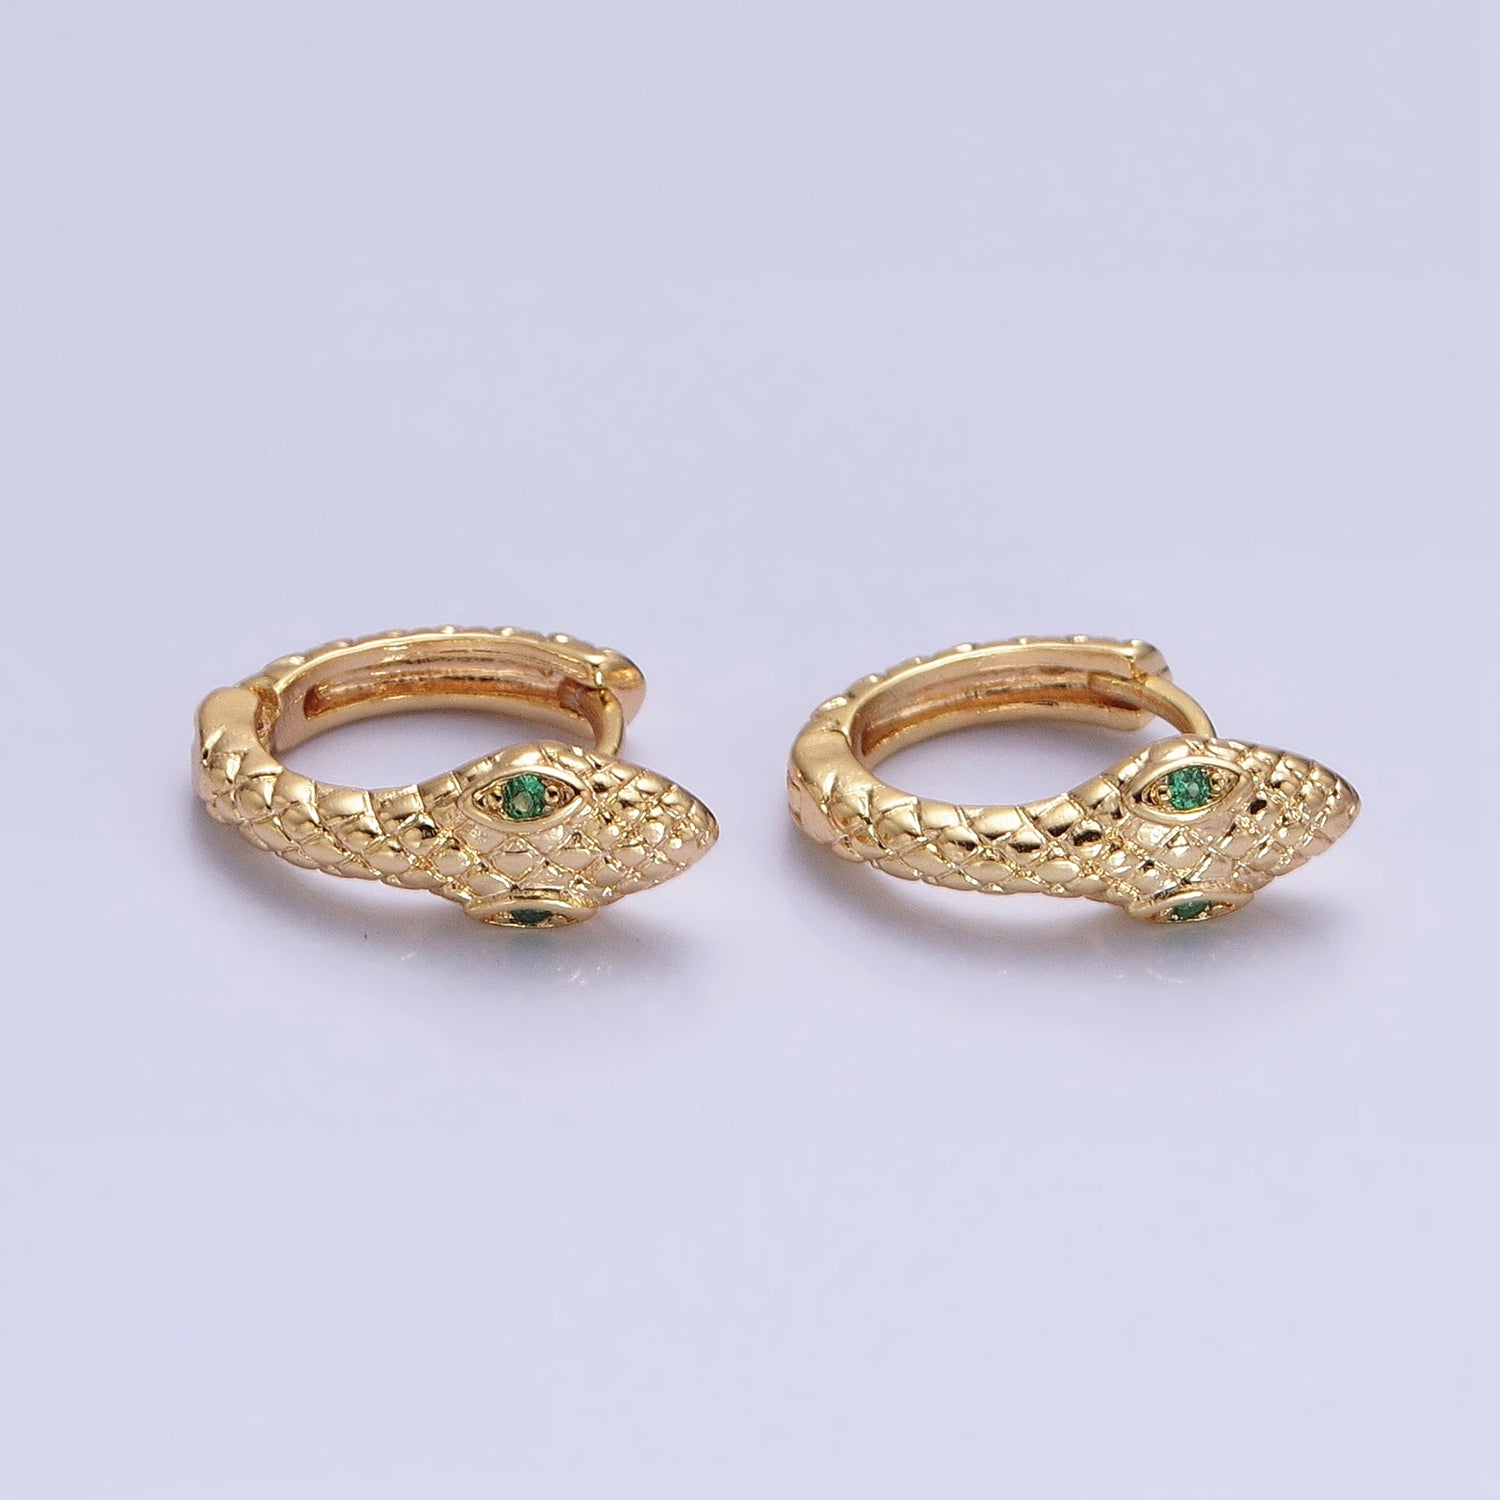 Gold, Silver Green-Eyed Scaled Snake Serpent 11mm Cartilage Huggie Earrings | AB751 AB-850